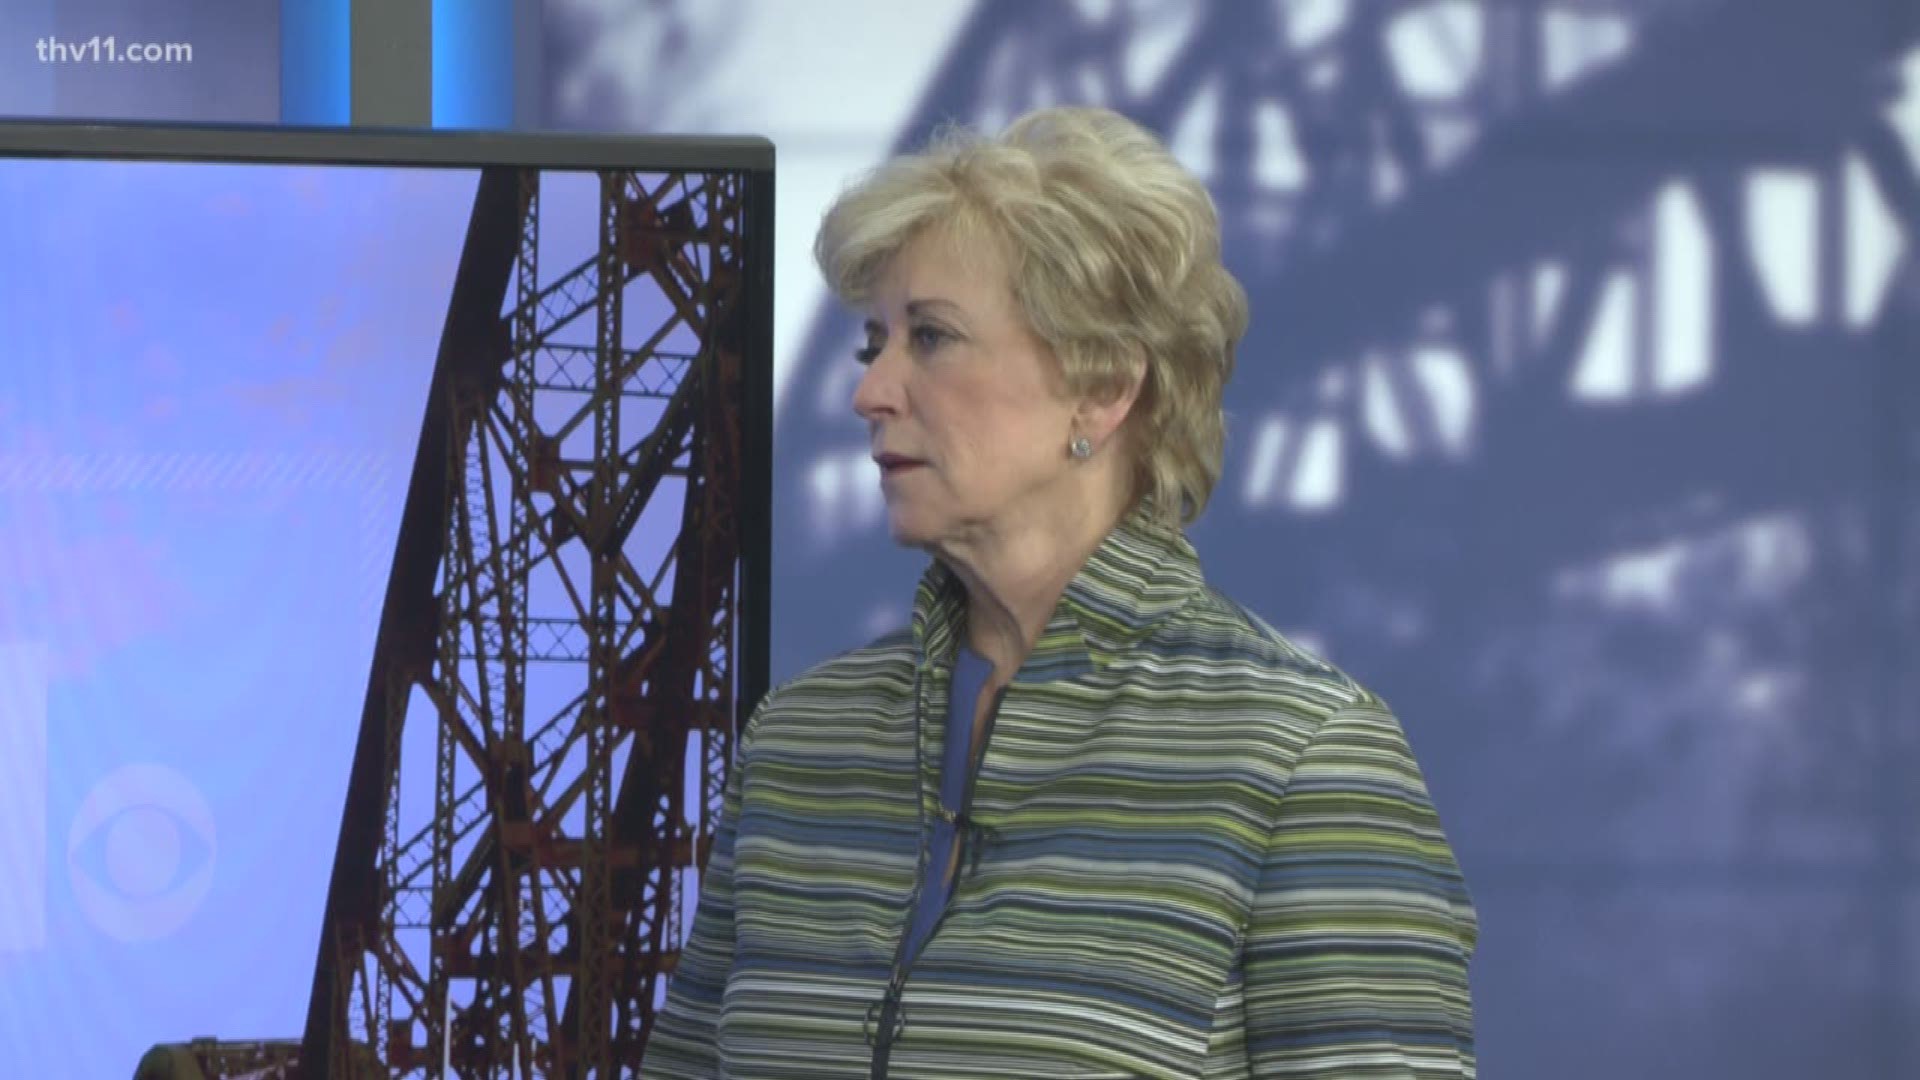 Linda McMahon stopped by THV11 to highlight the role of small businesses in economic growth.